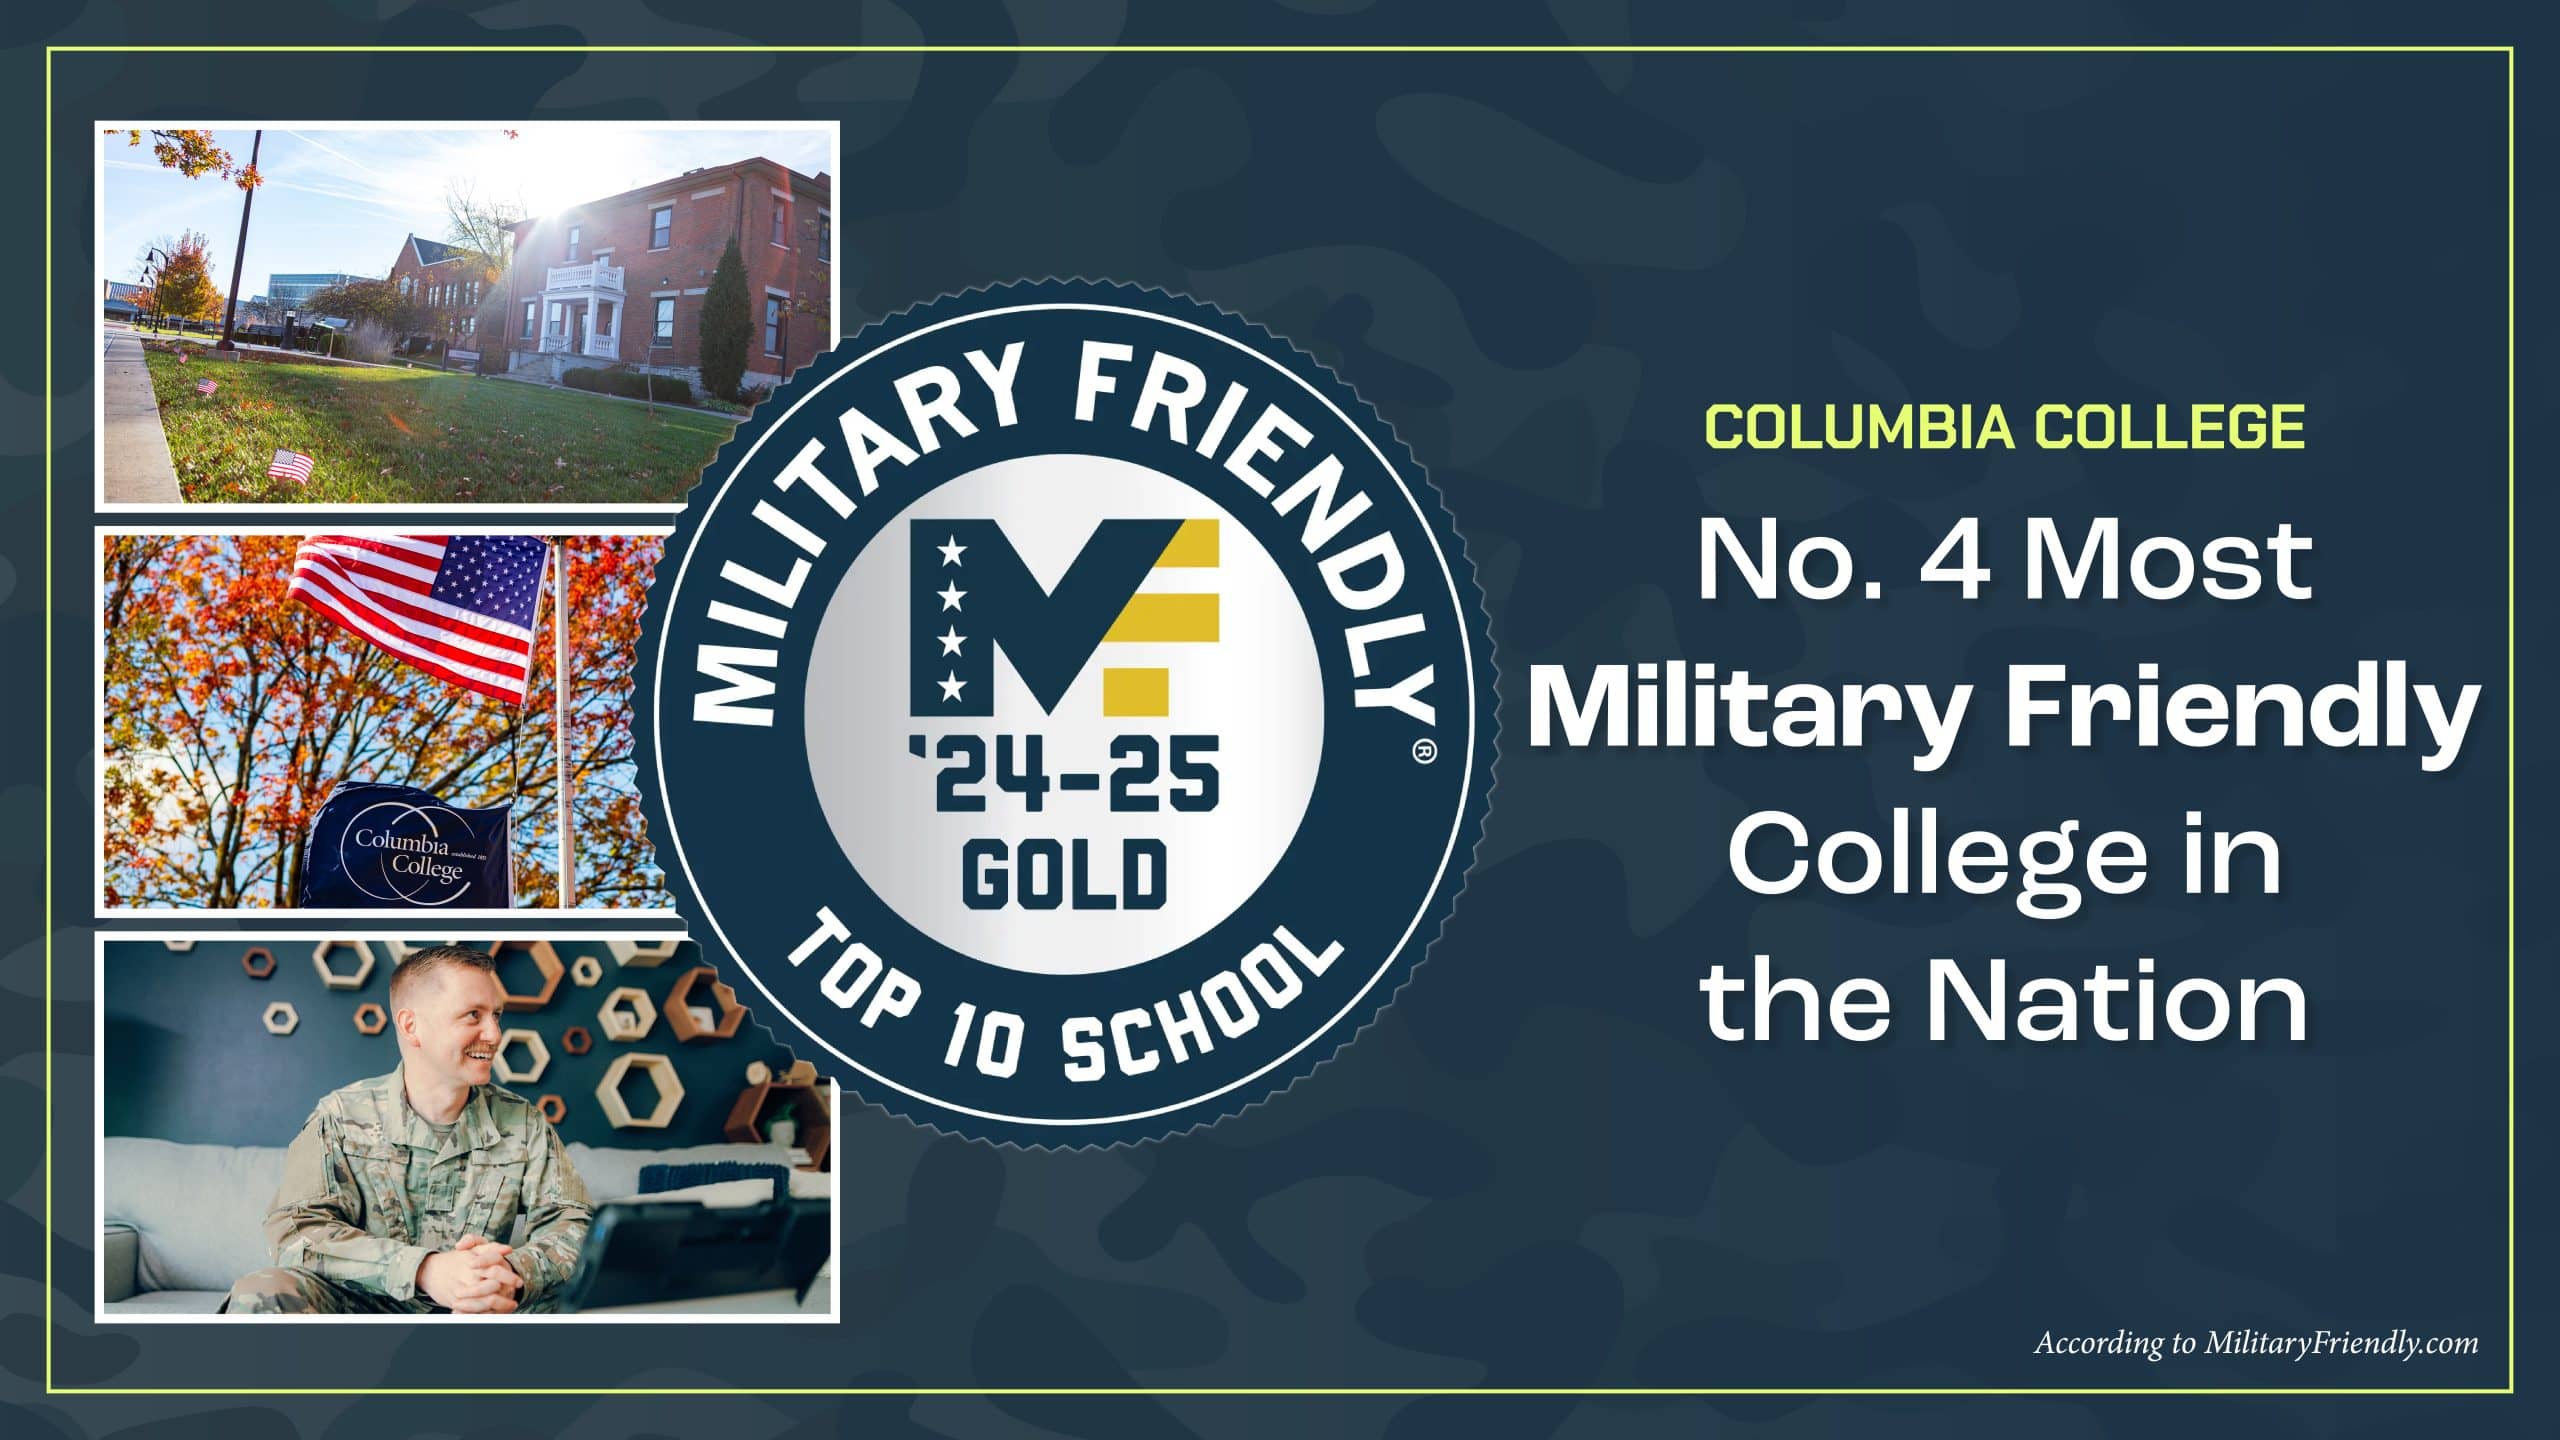 Collage image of several spots on campus, a vet sitting on a couch, and the Military Friendly '24-25 gold top 10 school badge.